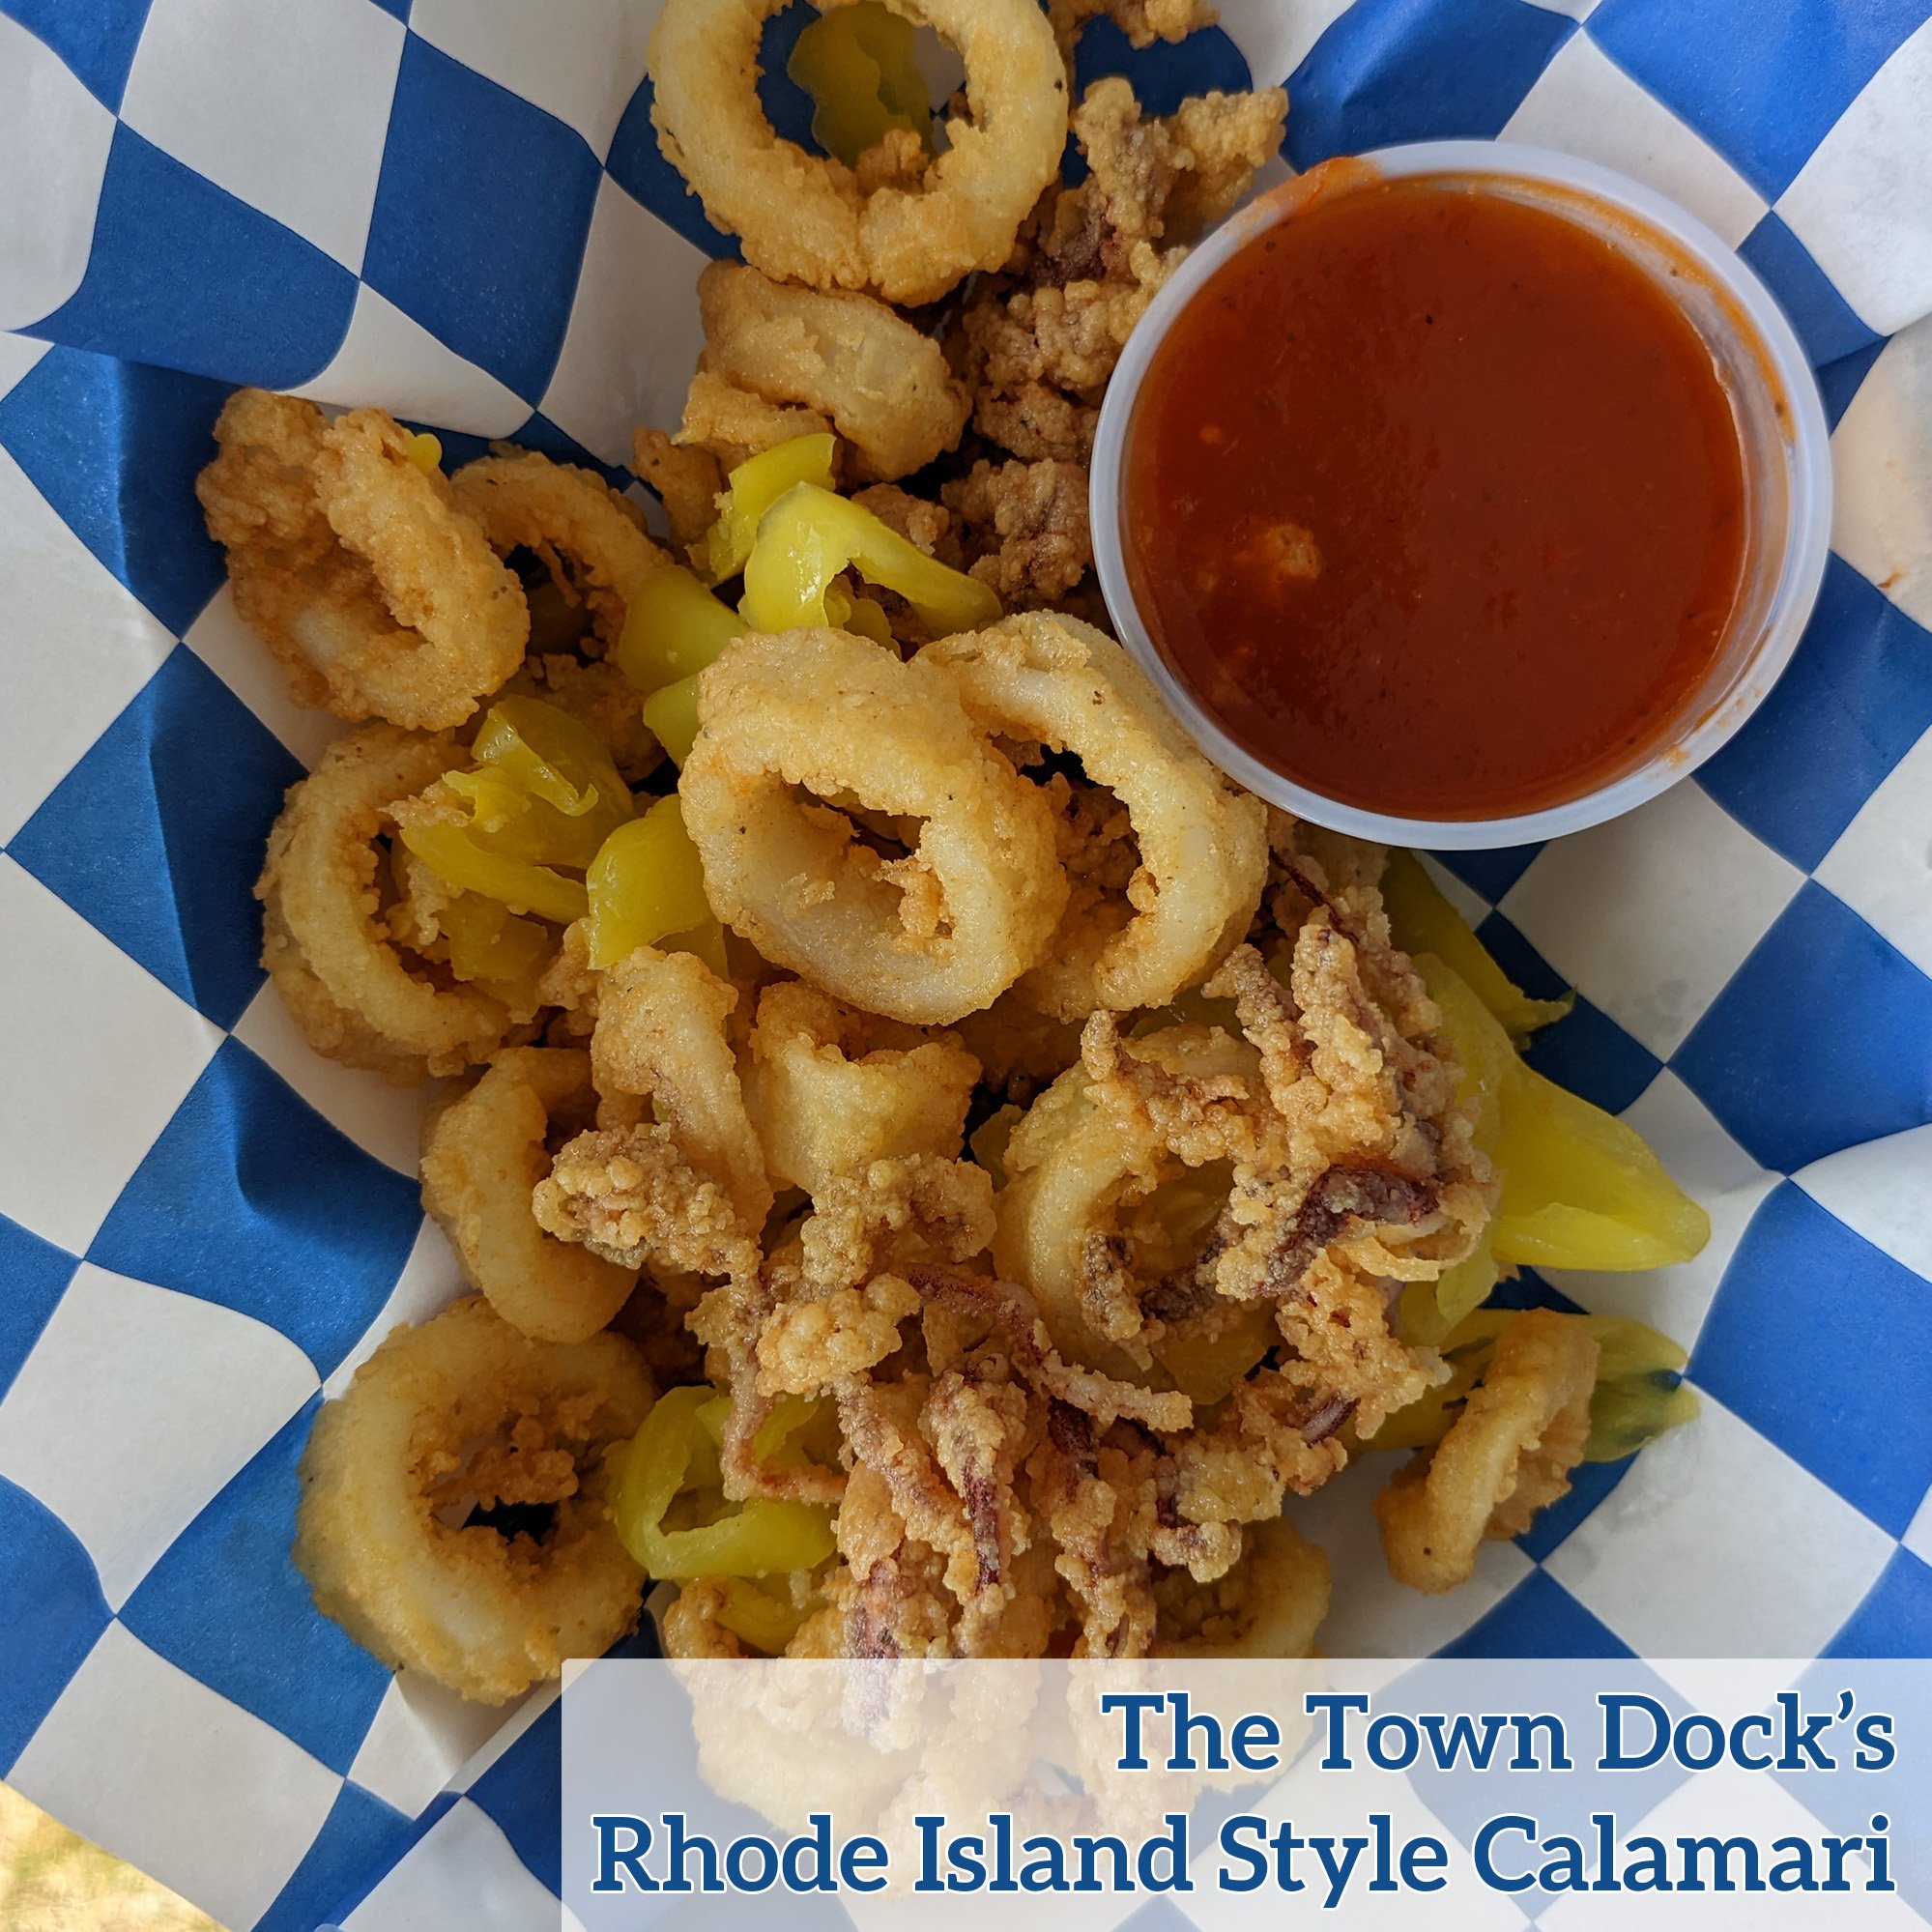 Calamari rings and tentacles, fried, with hot peppers and a side of marinara